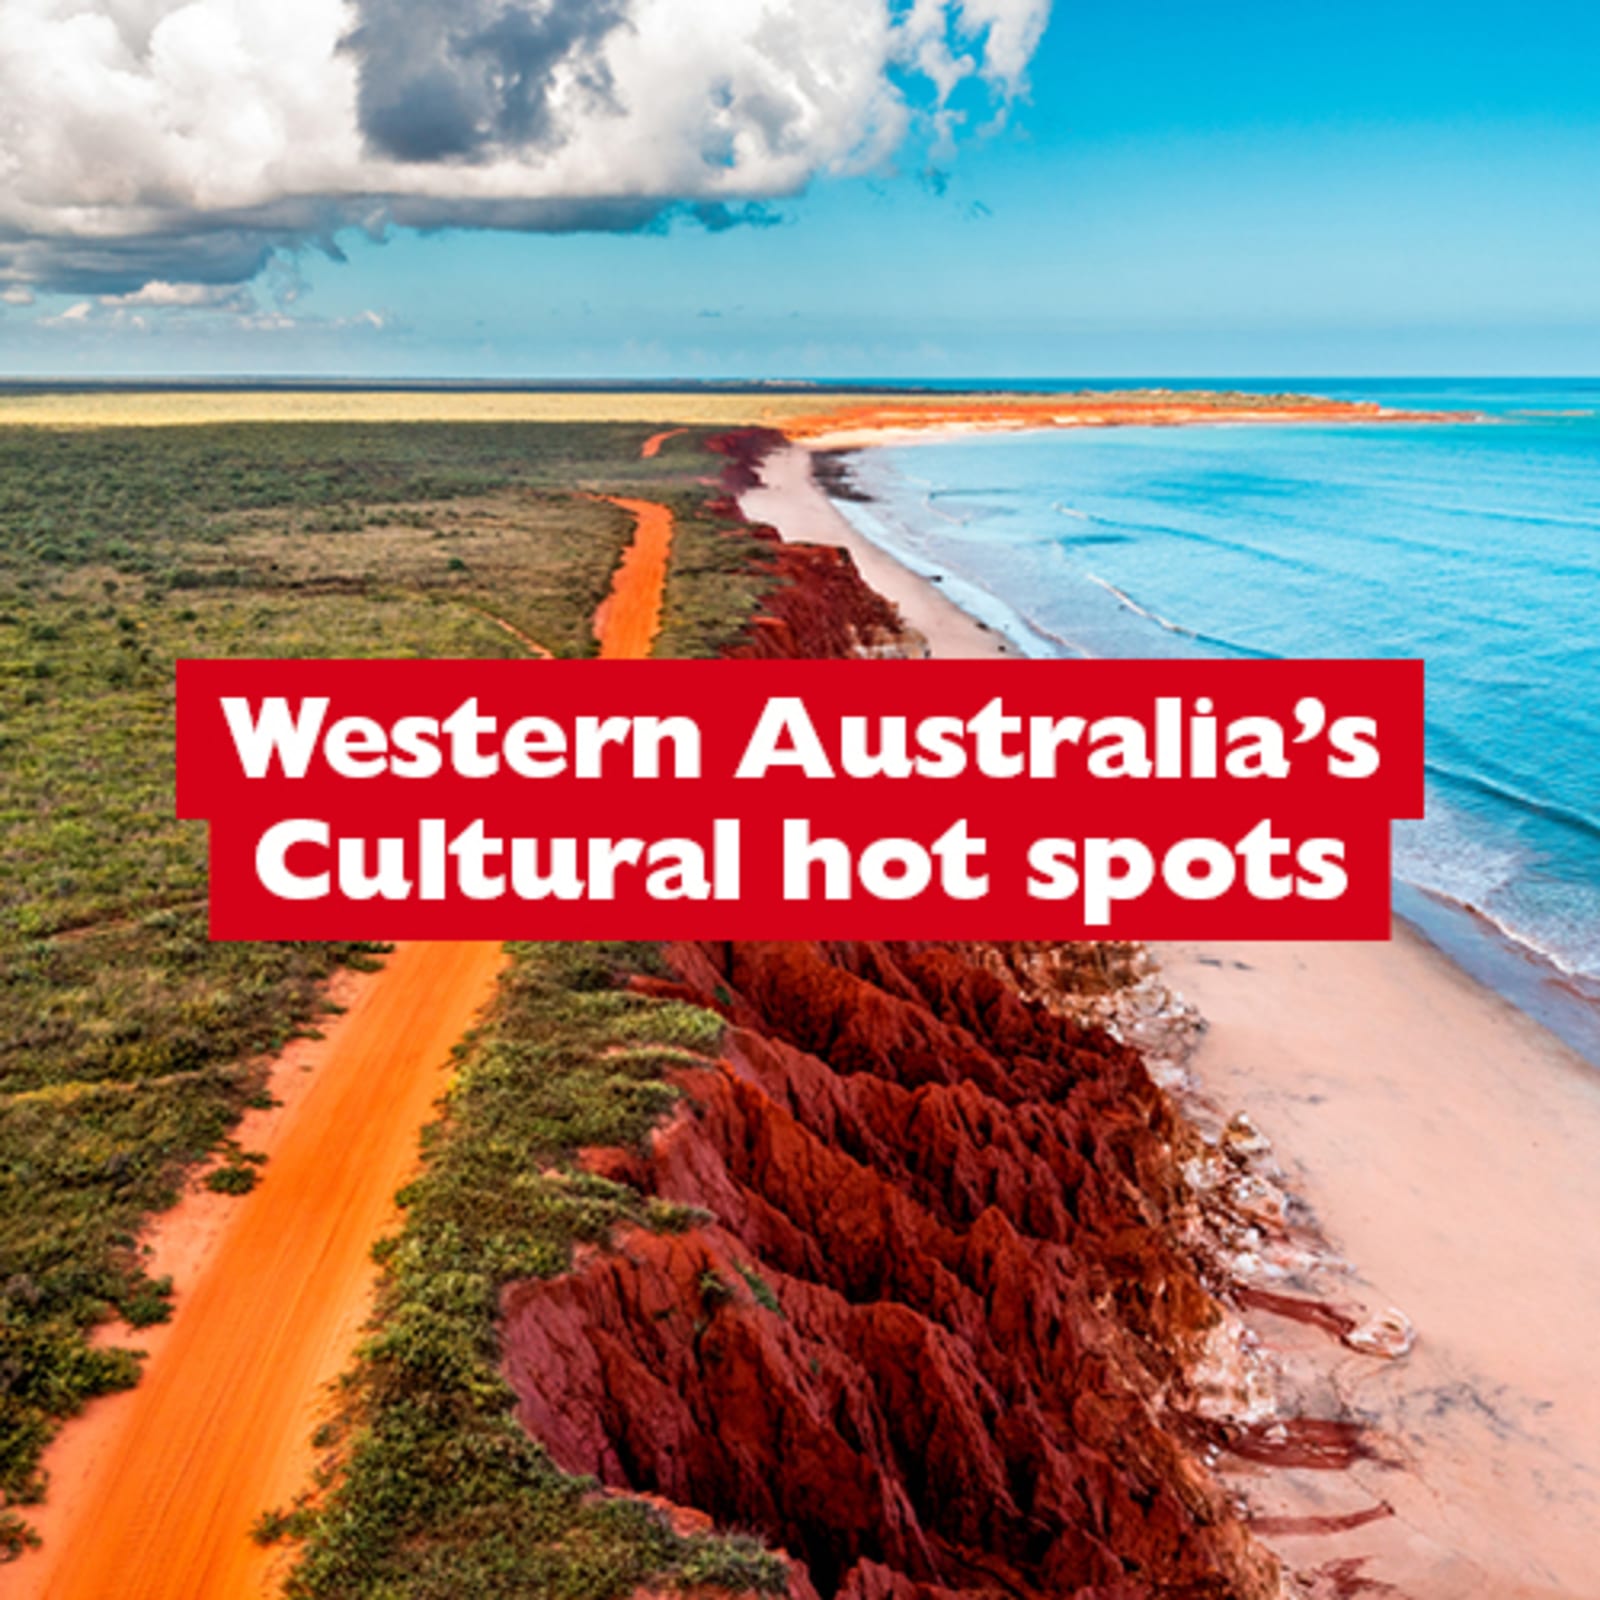 Western Australia's Cultural hot spots - bright red cliffs and an orange road along a coastline